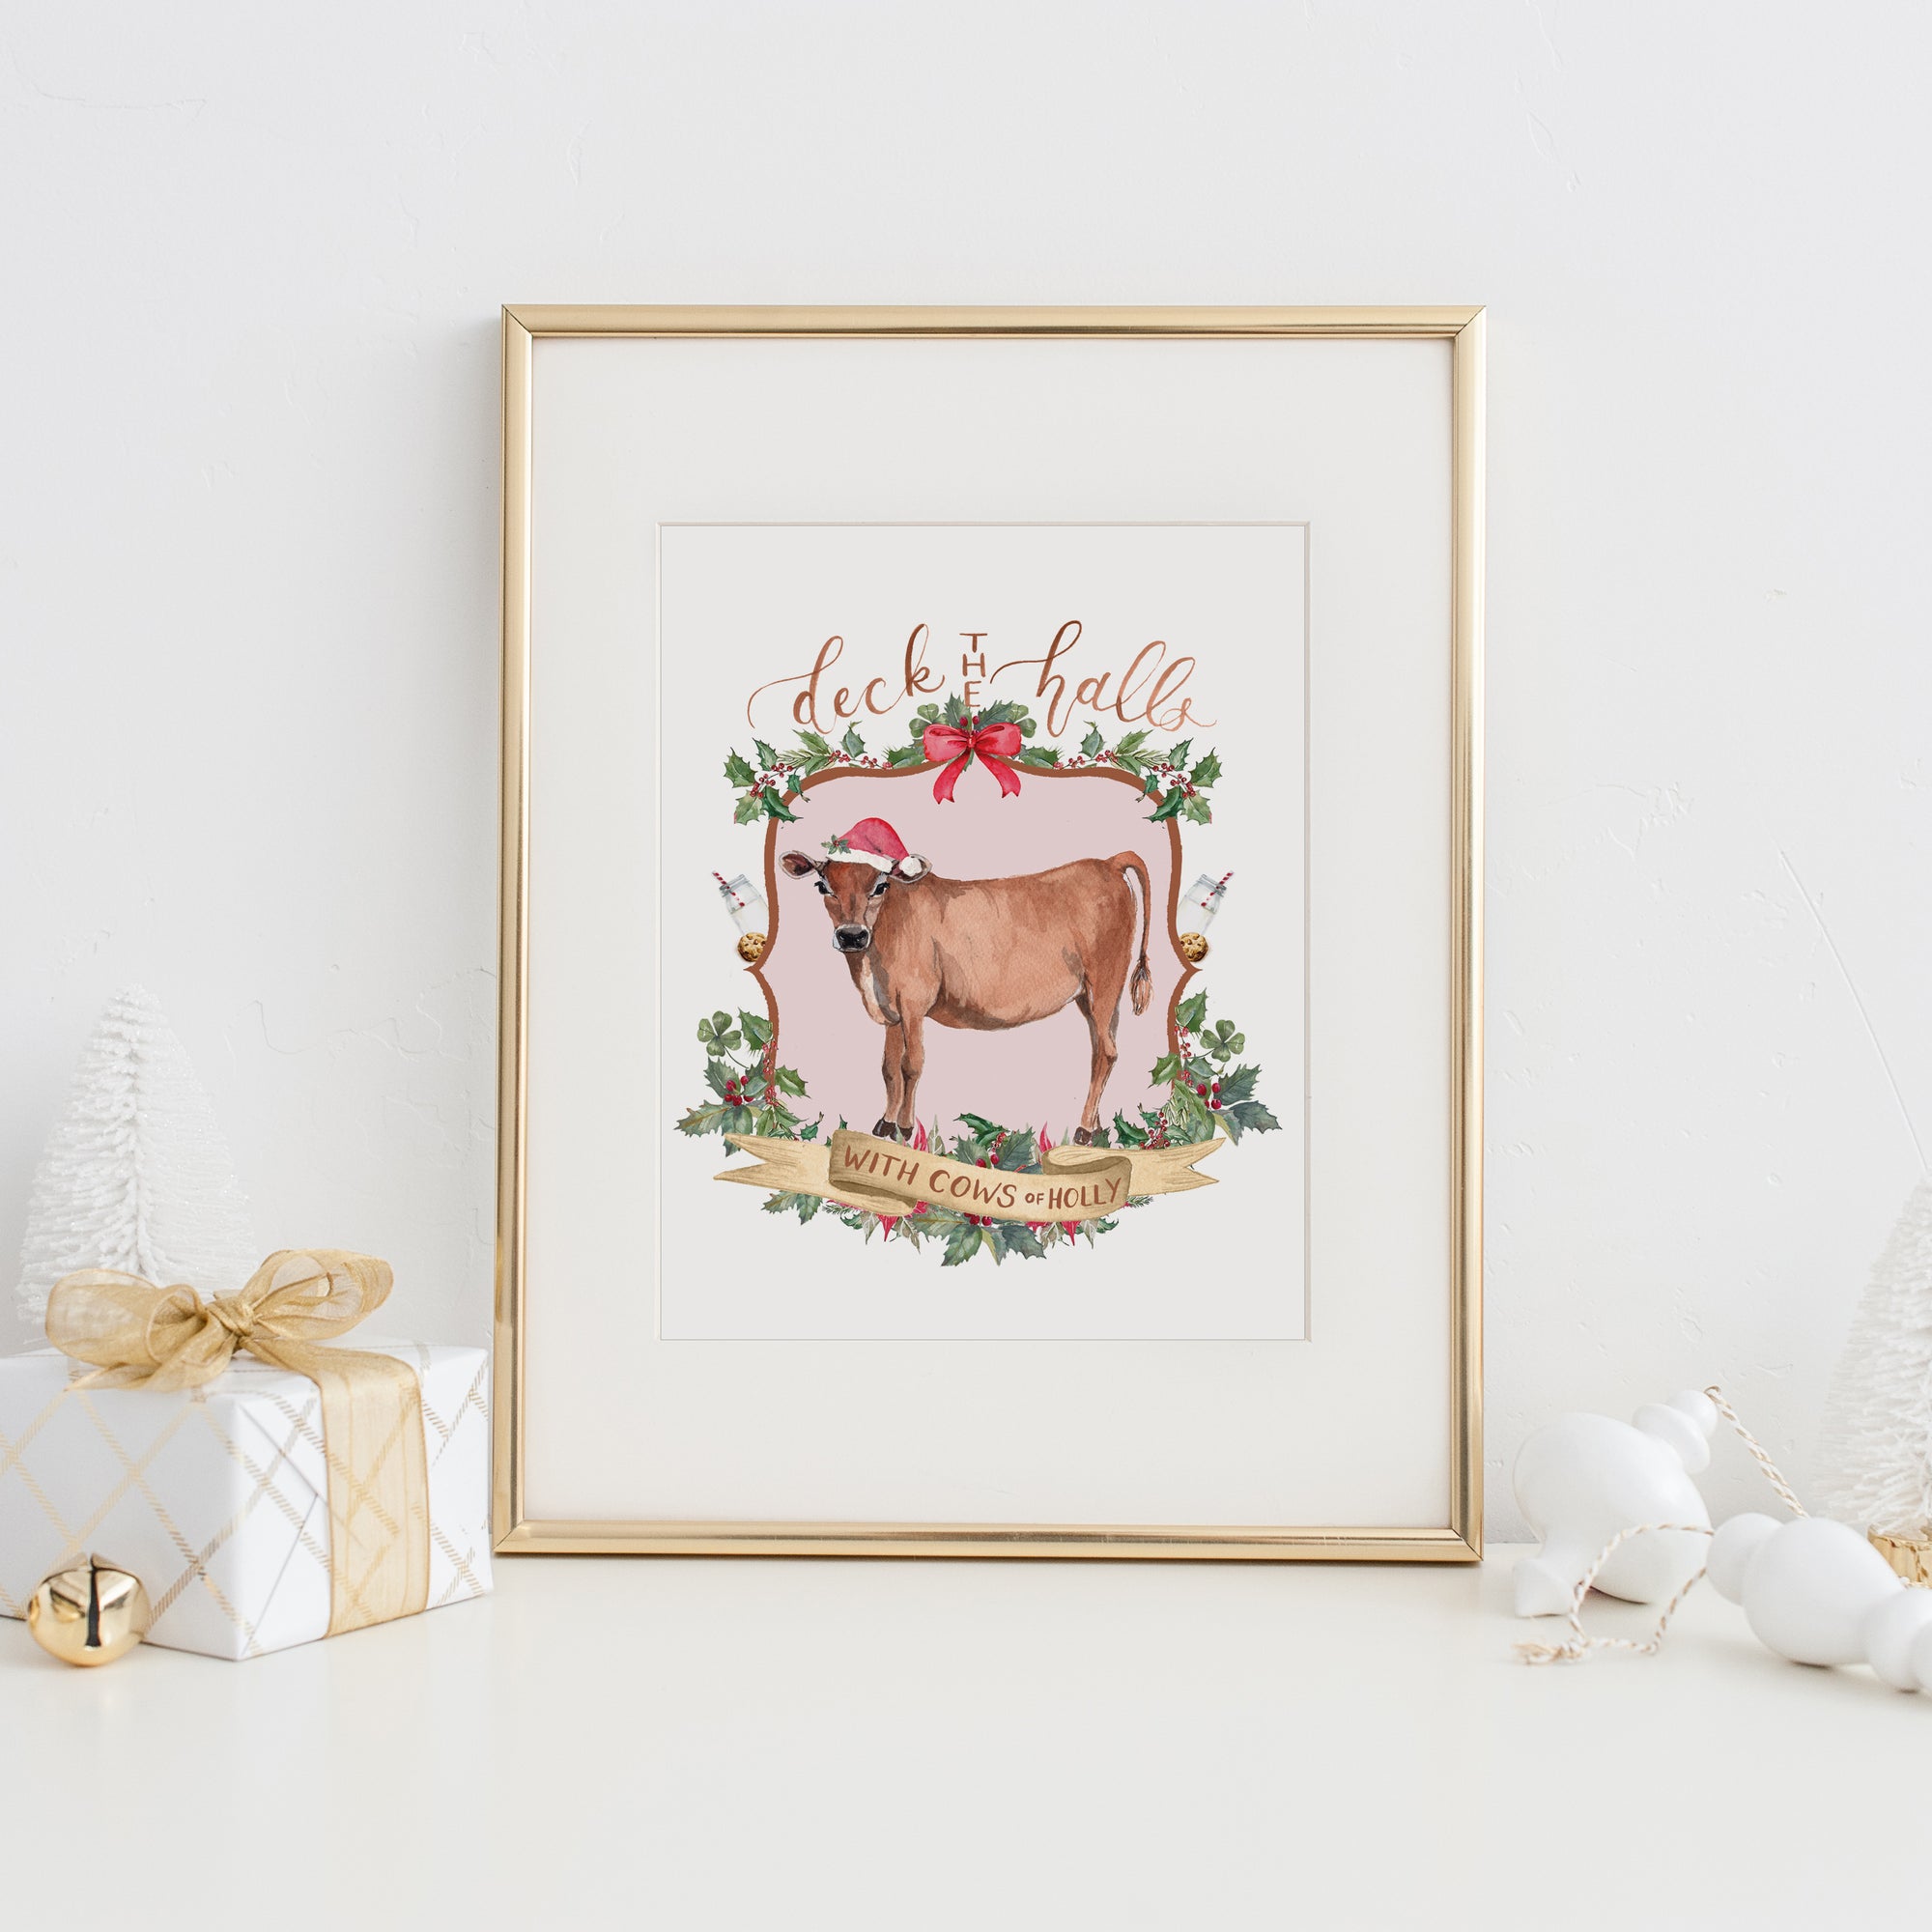 Deck the Halls with Cows of Holly Art Print